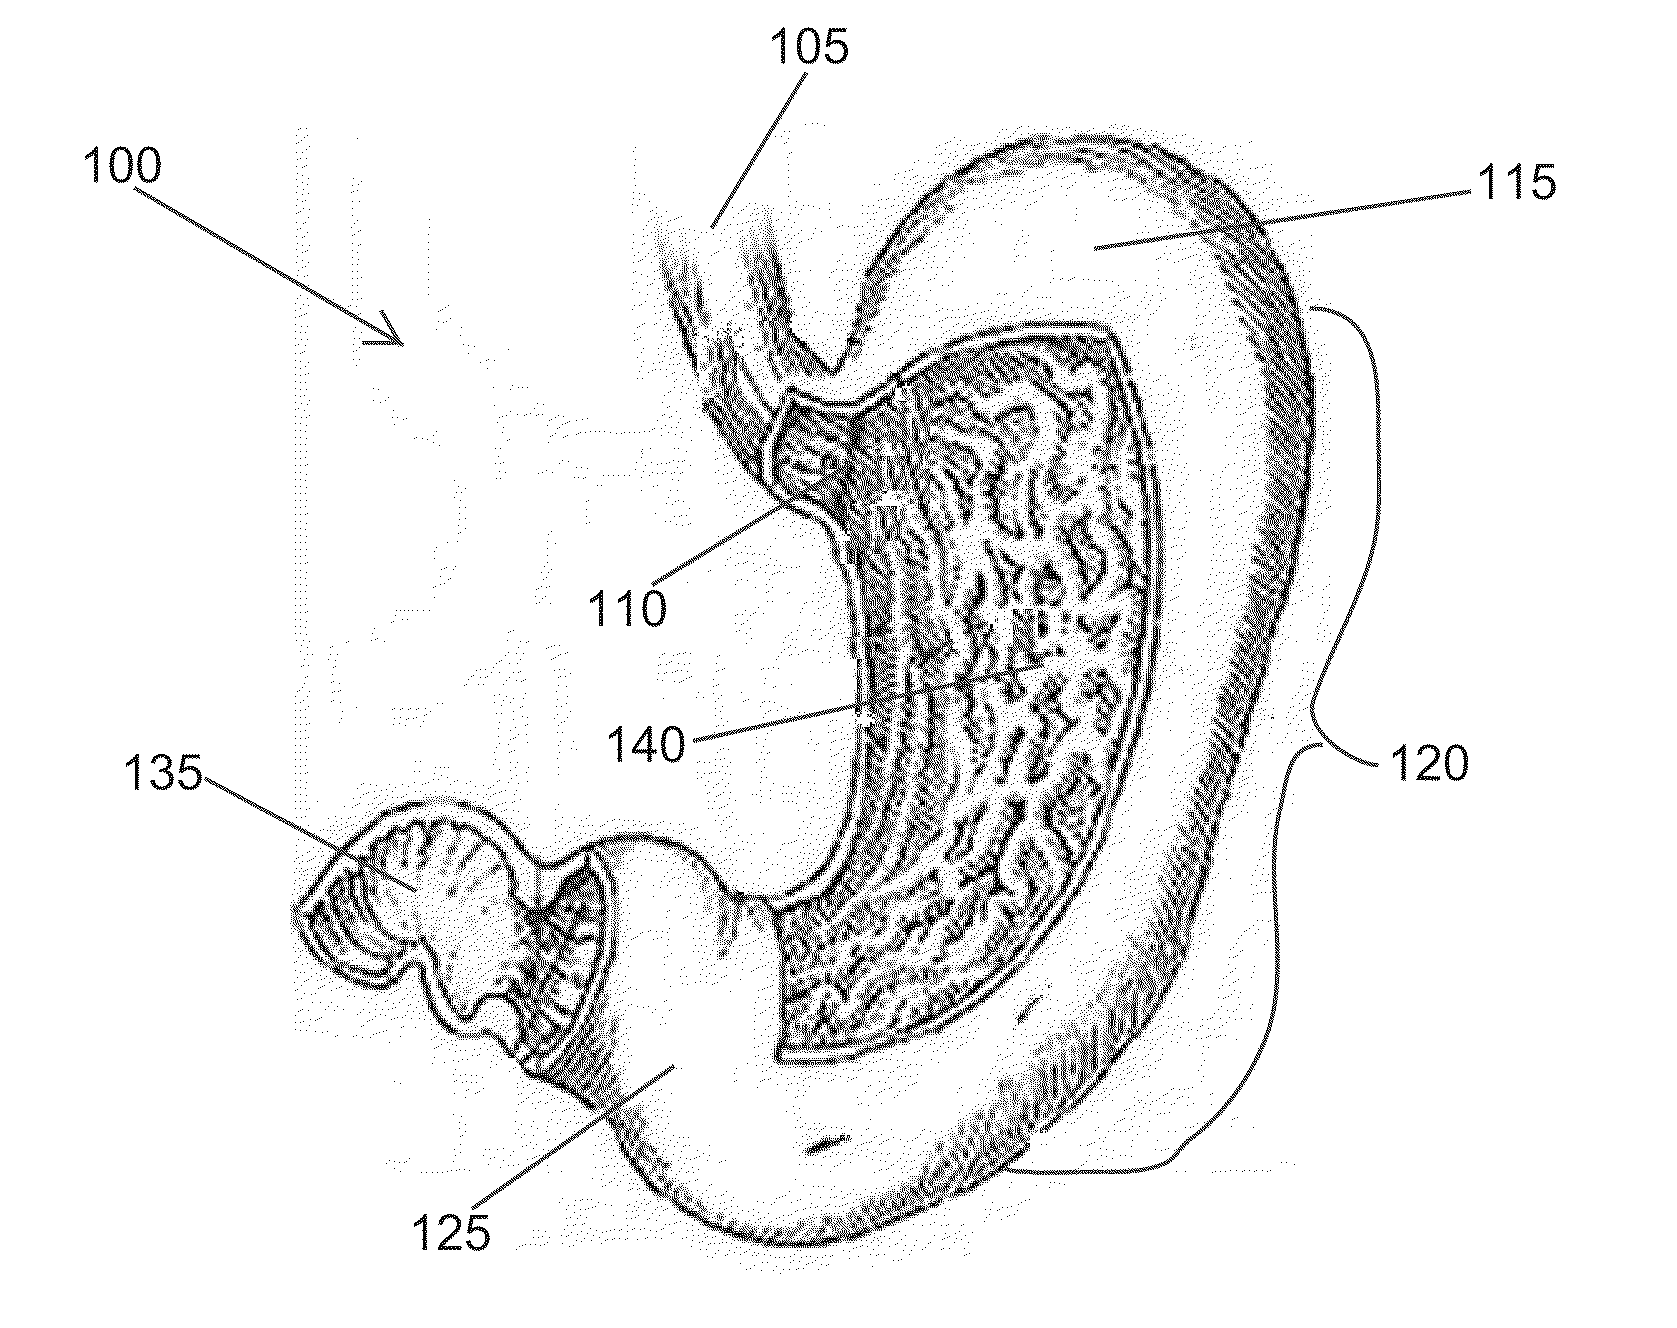 High specific gravity intragastric device